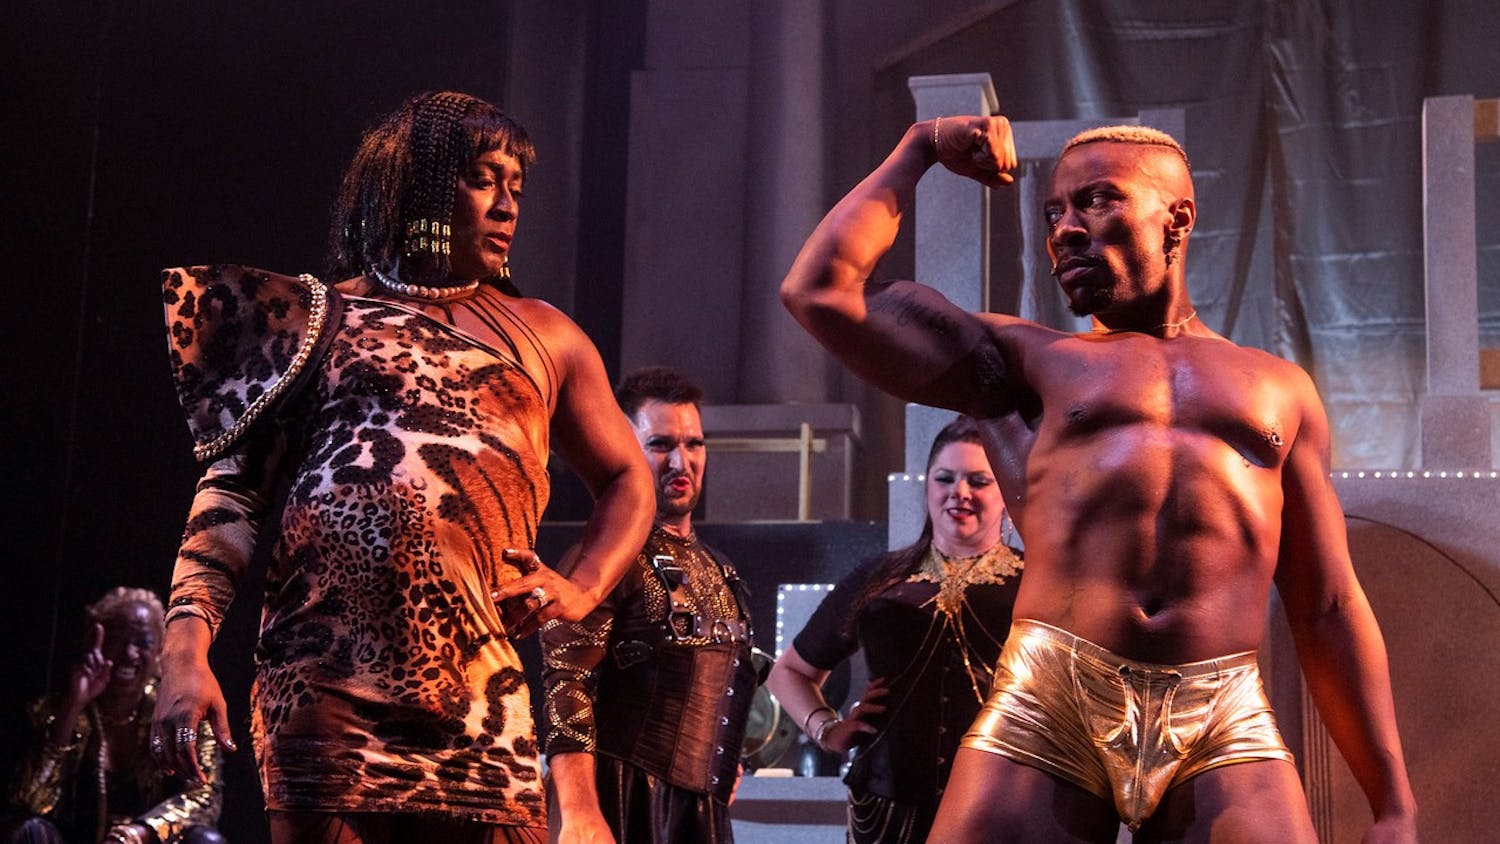 Walter Graham (left) as Dr. Frank 'N' Furter with his new creation Rocky, played by James Patrick Allen (right). &nbsp;Trustus Theatre's production of "The Rocky Horror Show," running from Sept. 30 to Oct. 29, combines brings a new perspective in the form of a contemporary production of an established classic Rocky Horror Picture Show.